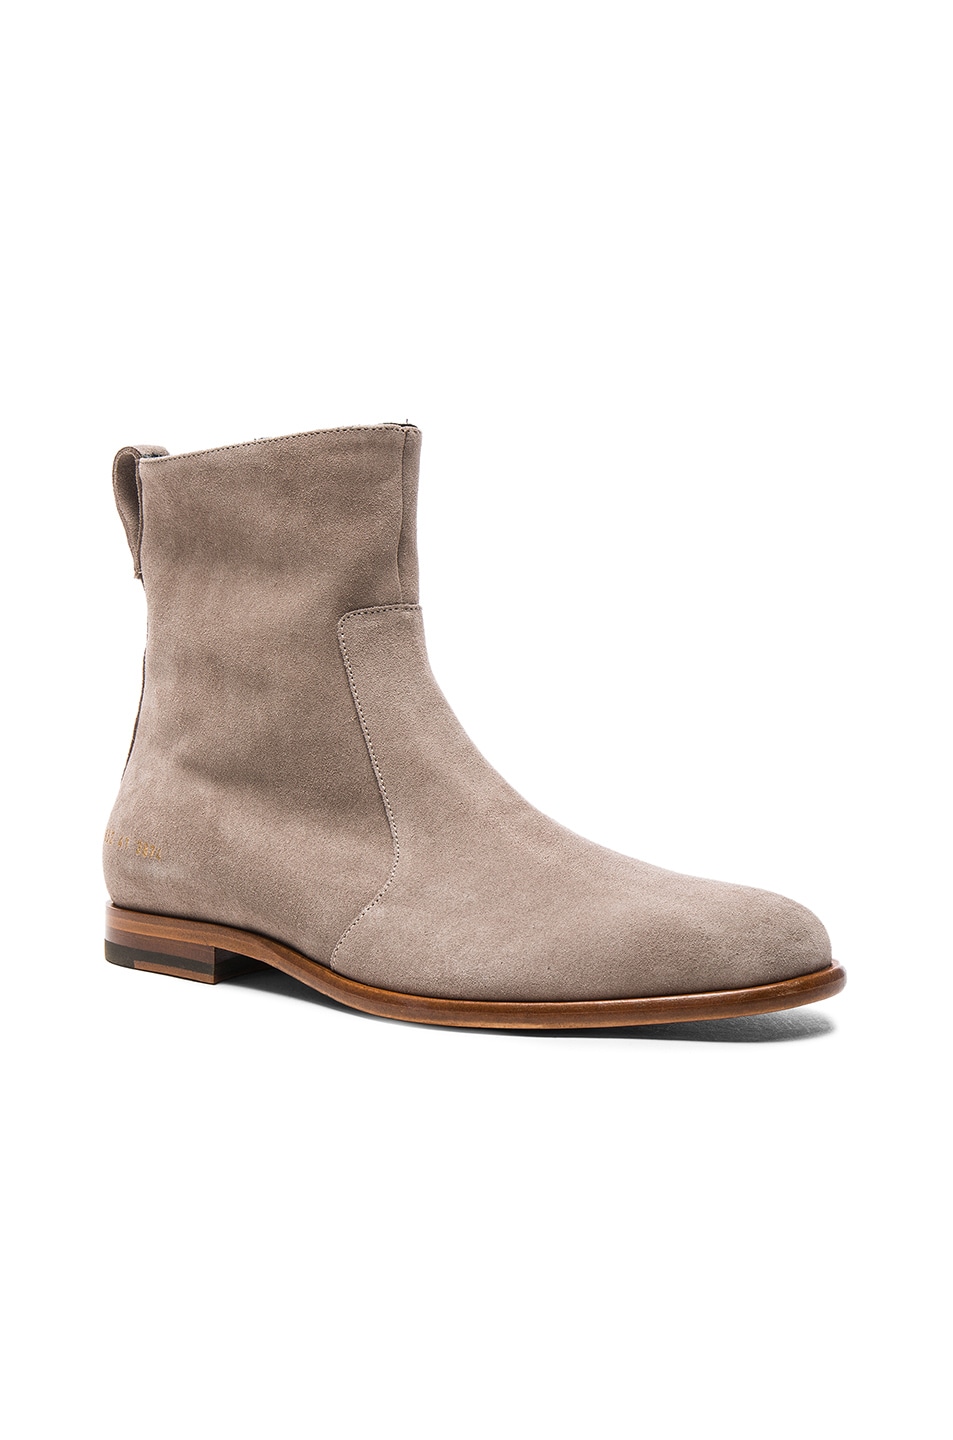 Image 1 of Robert Geller x Common Projects Suede Chelsea Boots in Sand